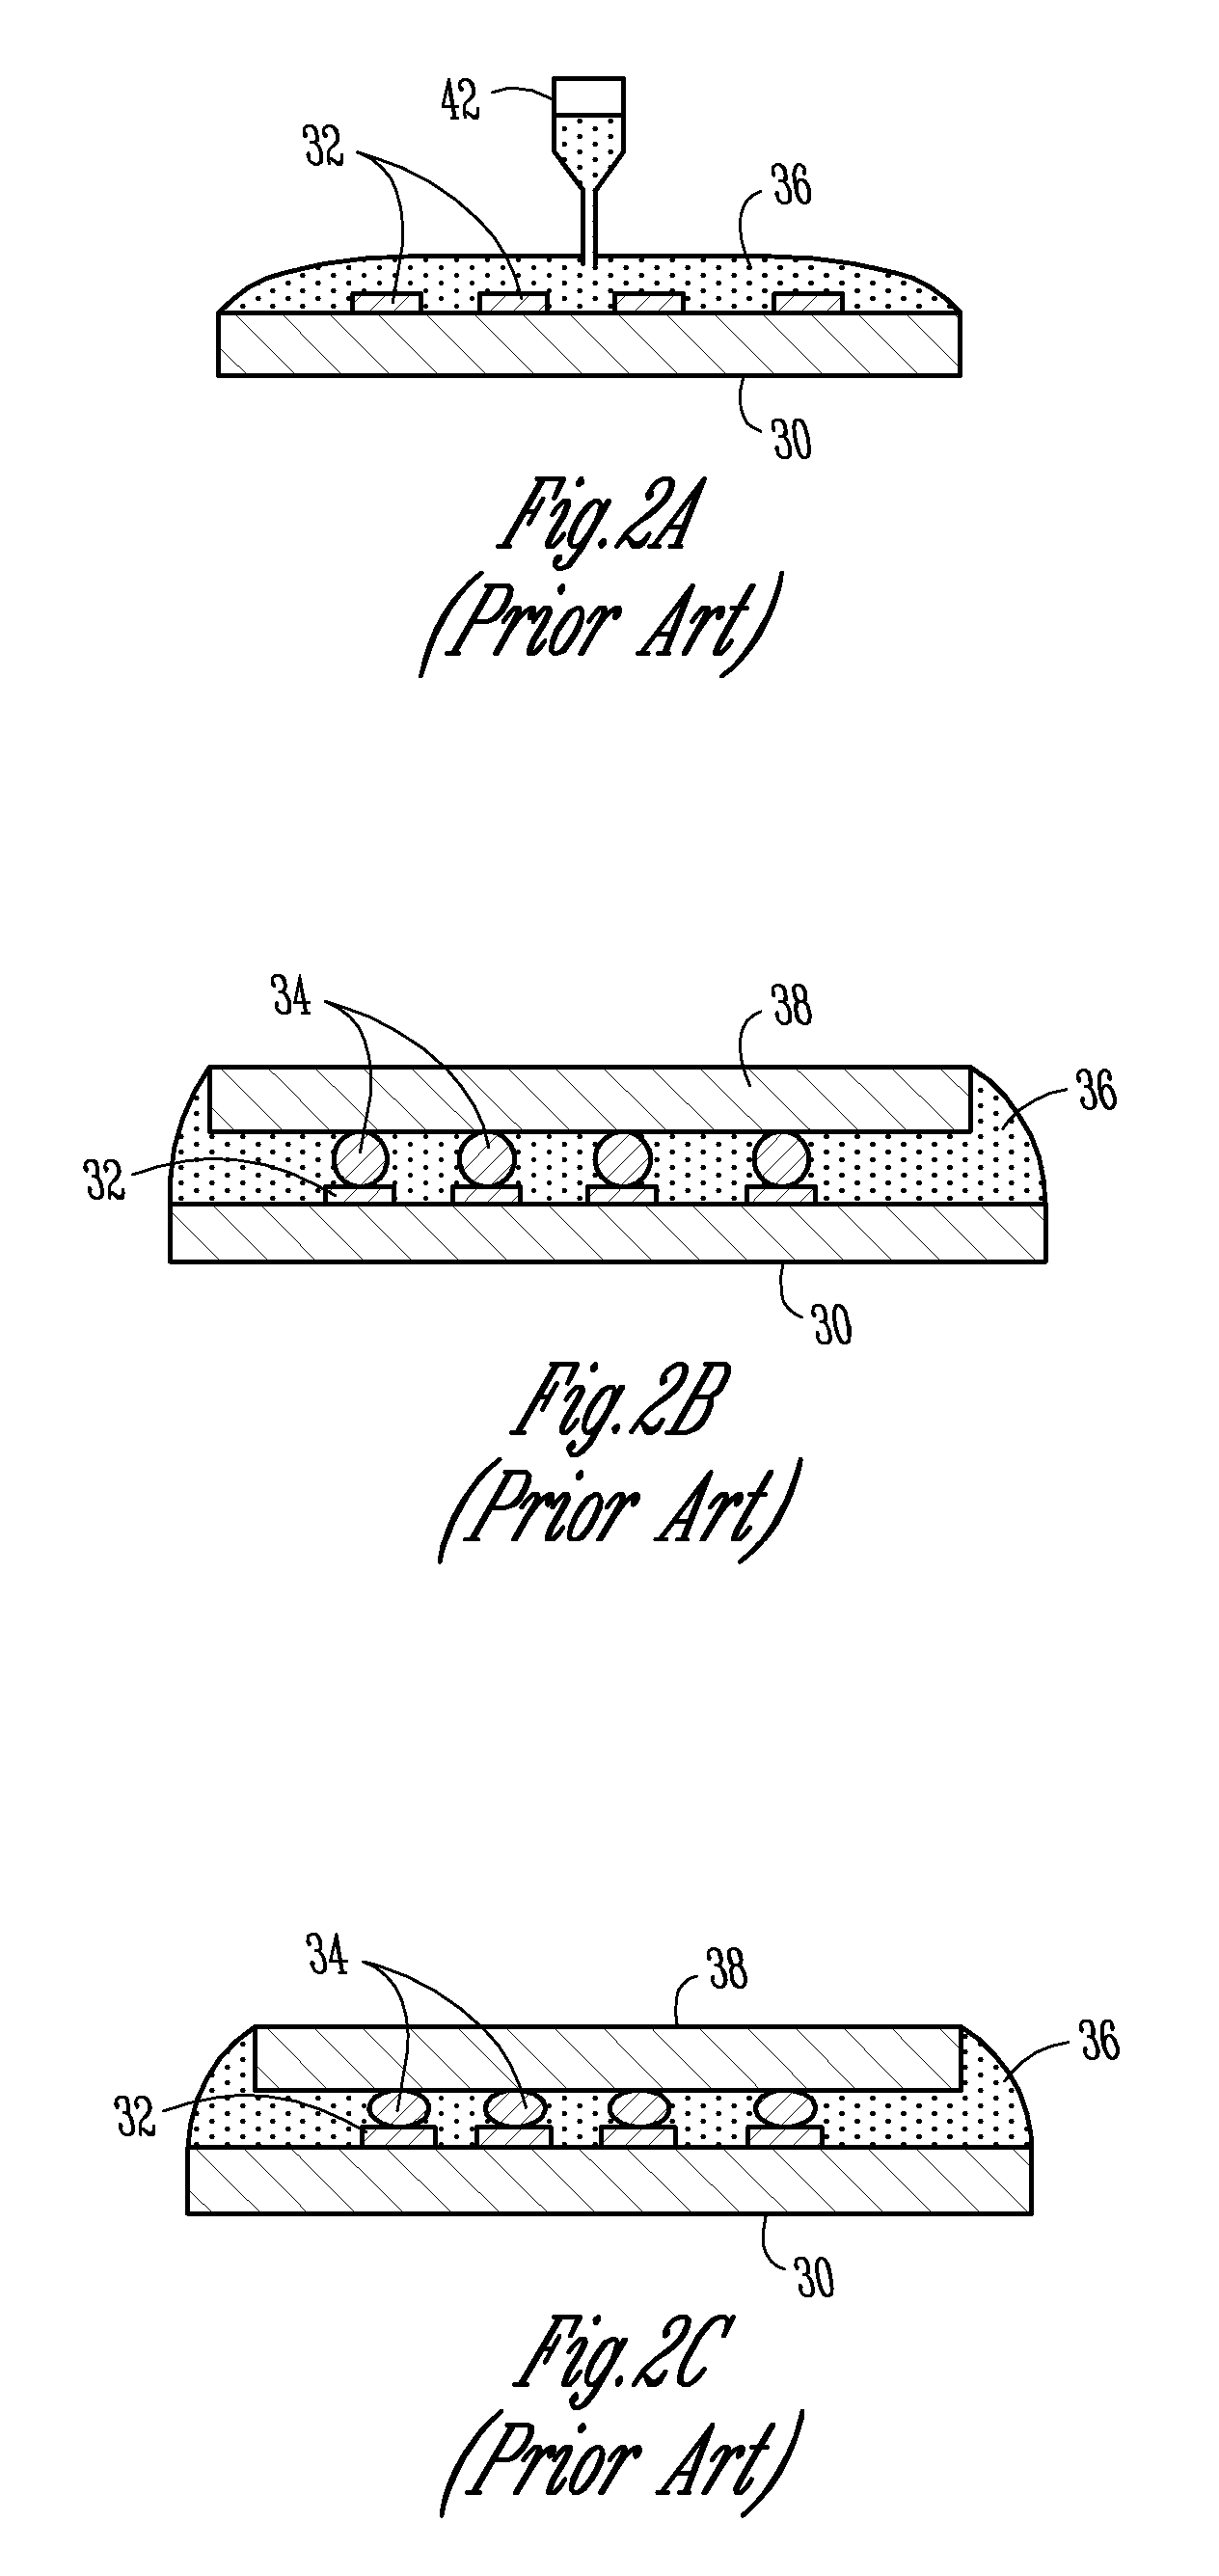 Electronic assemblies and systems with filled no-flow underfill